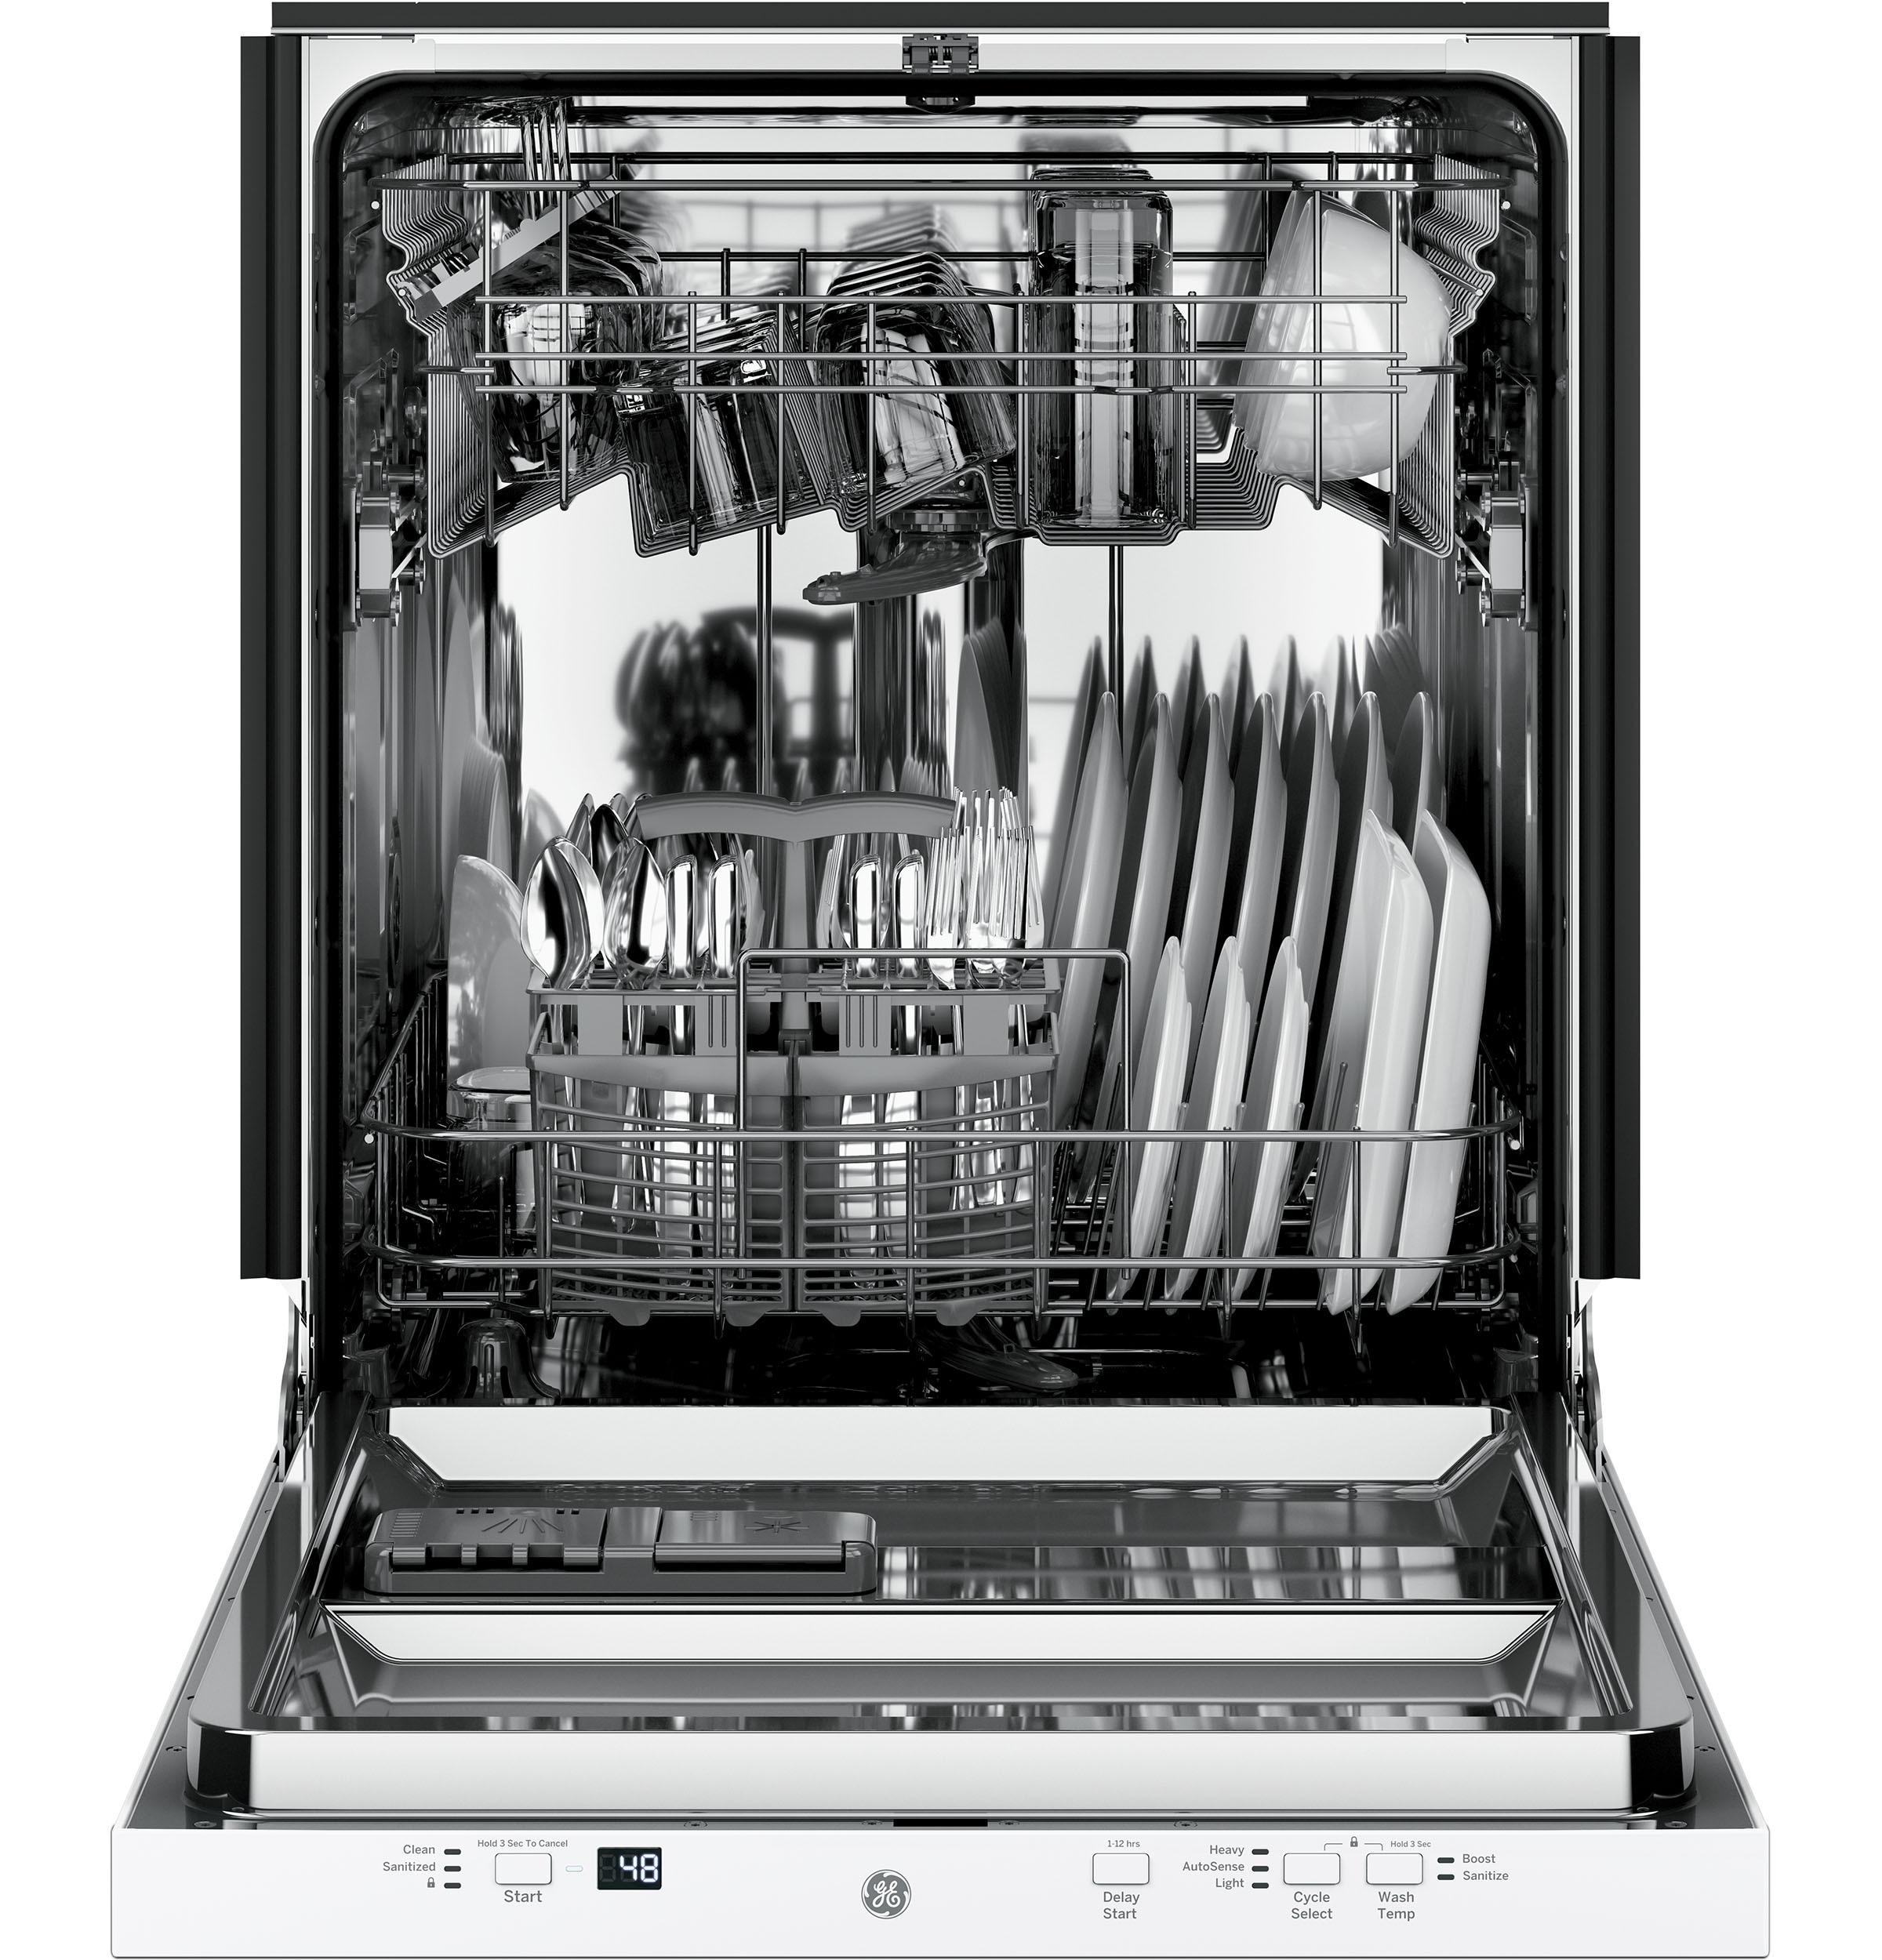 GE Top Control 24-in Built-In Dishwasher (White) ENERGY STAR, 51 